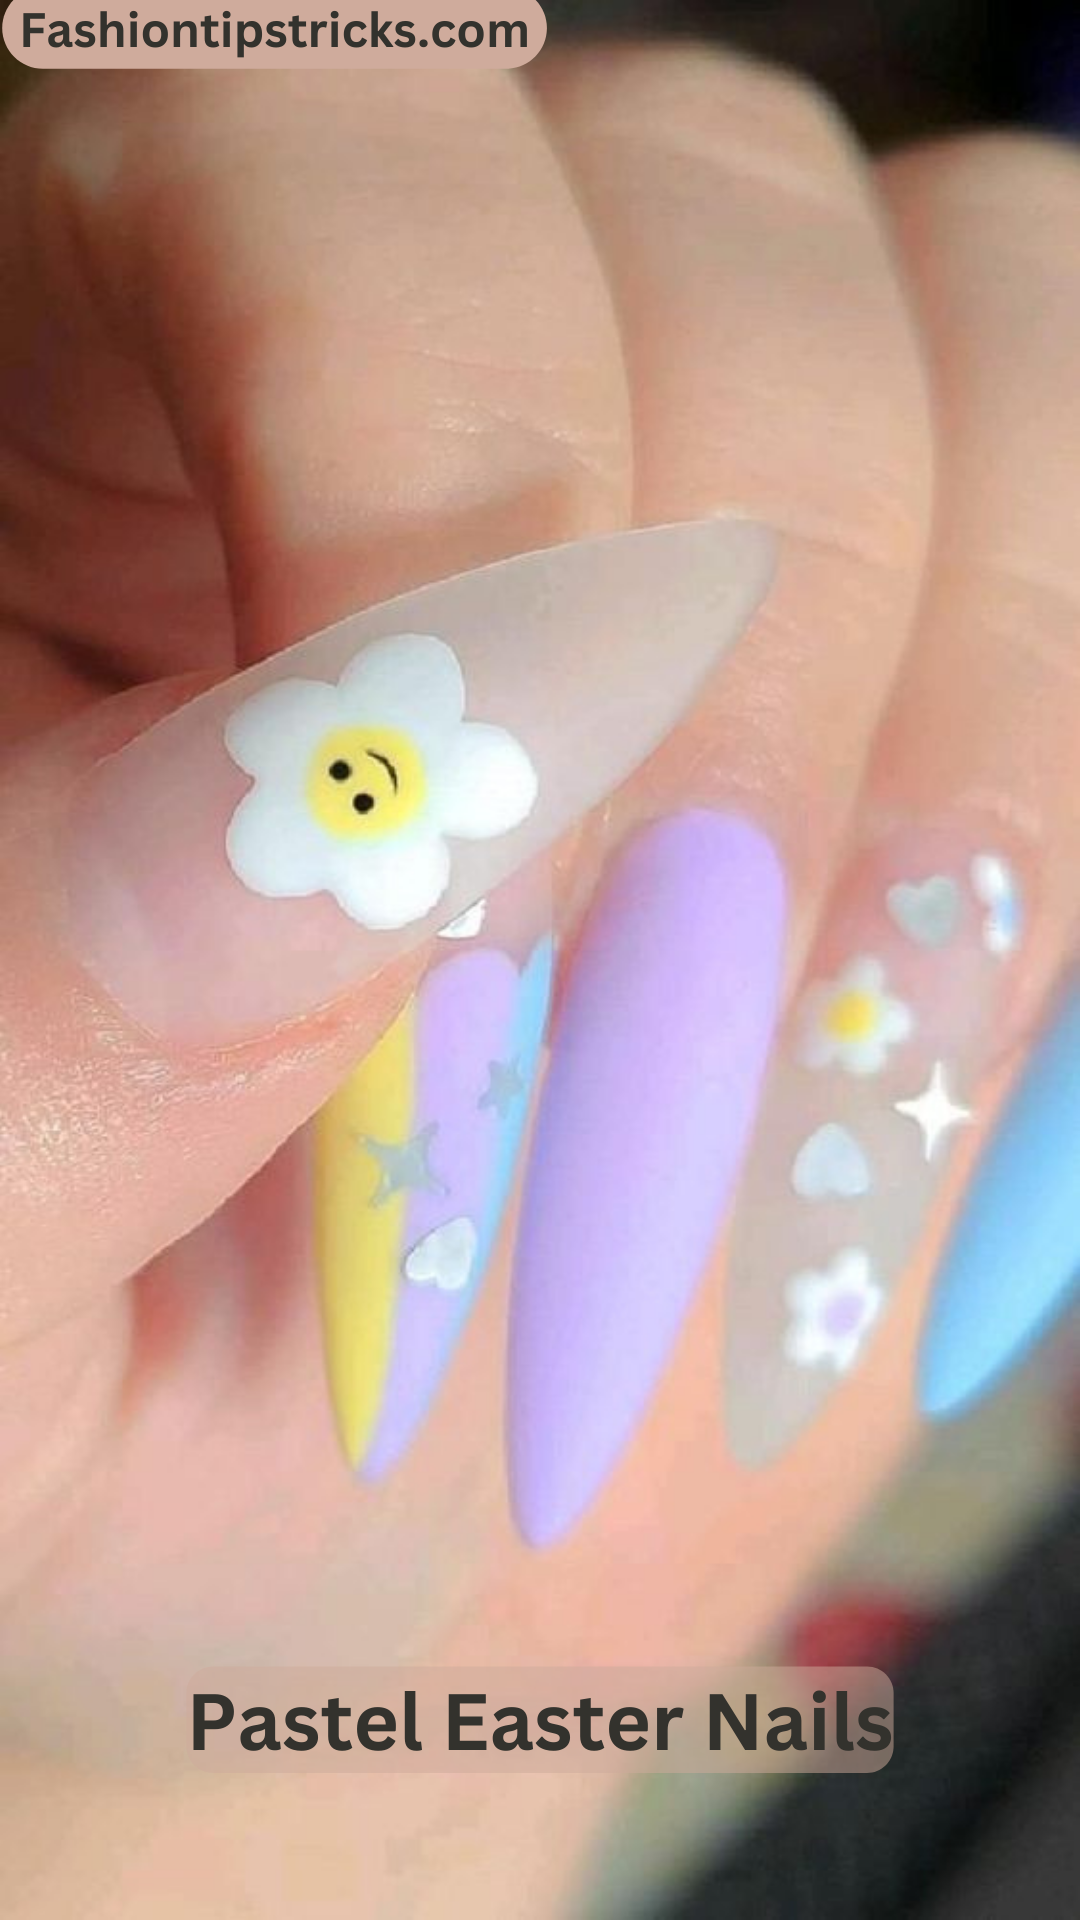 Pastel Easter Nails